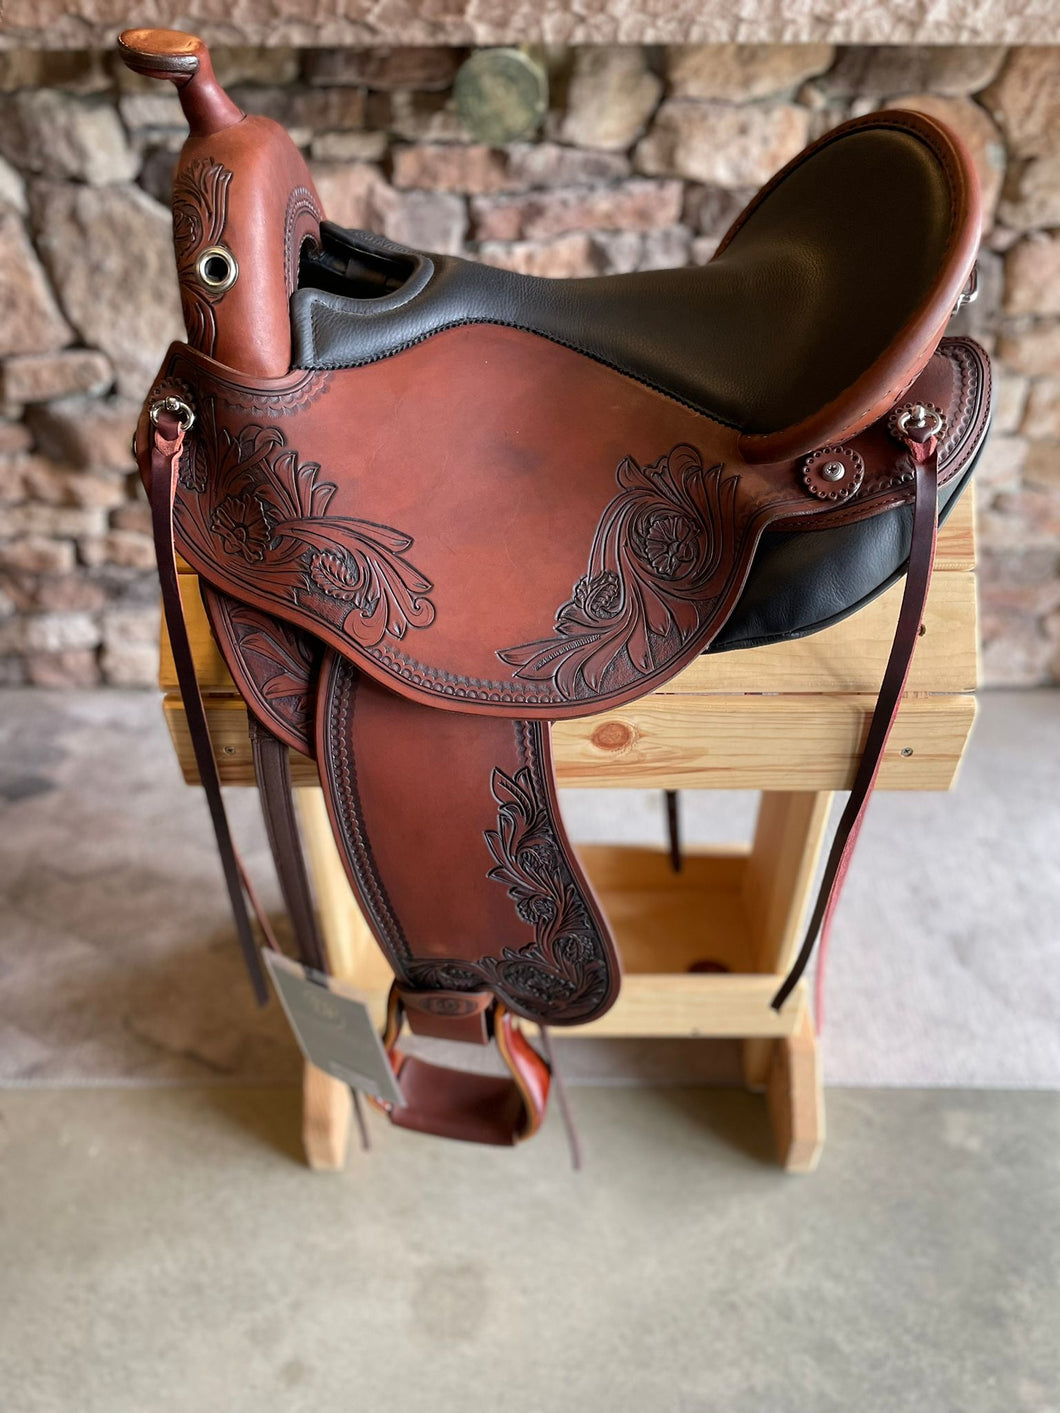 dp saddlery quantum short and light western with a western dressage seat 5211, side view on a wooden saddle rack 